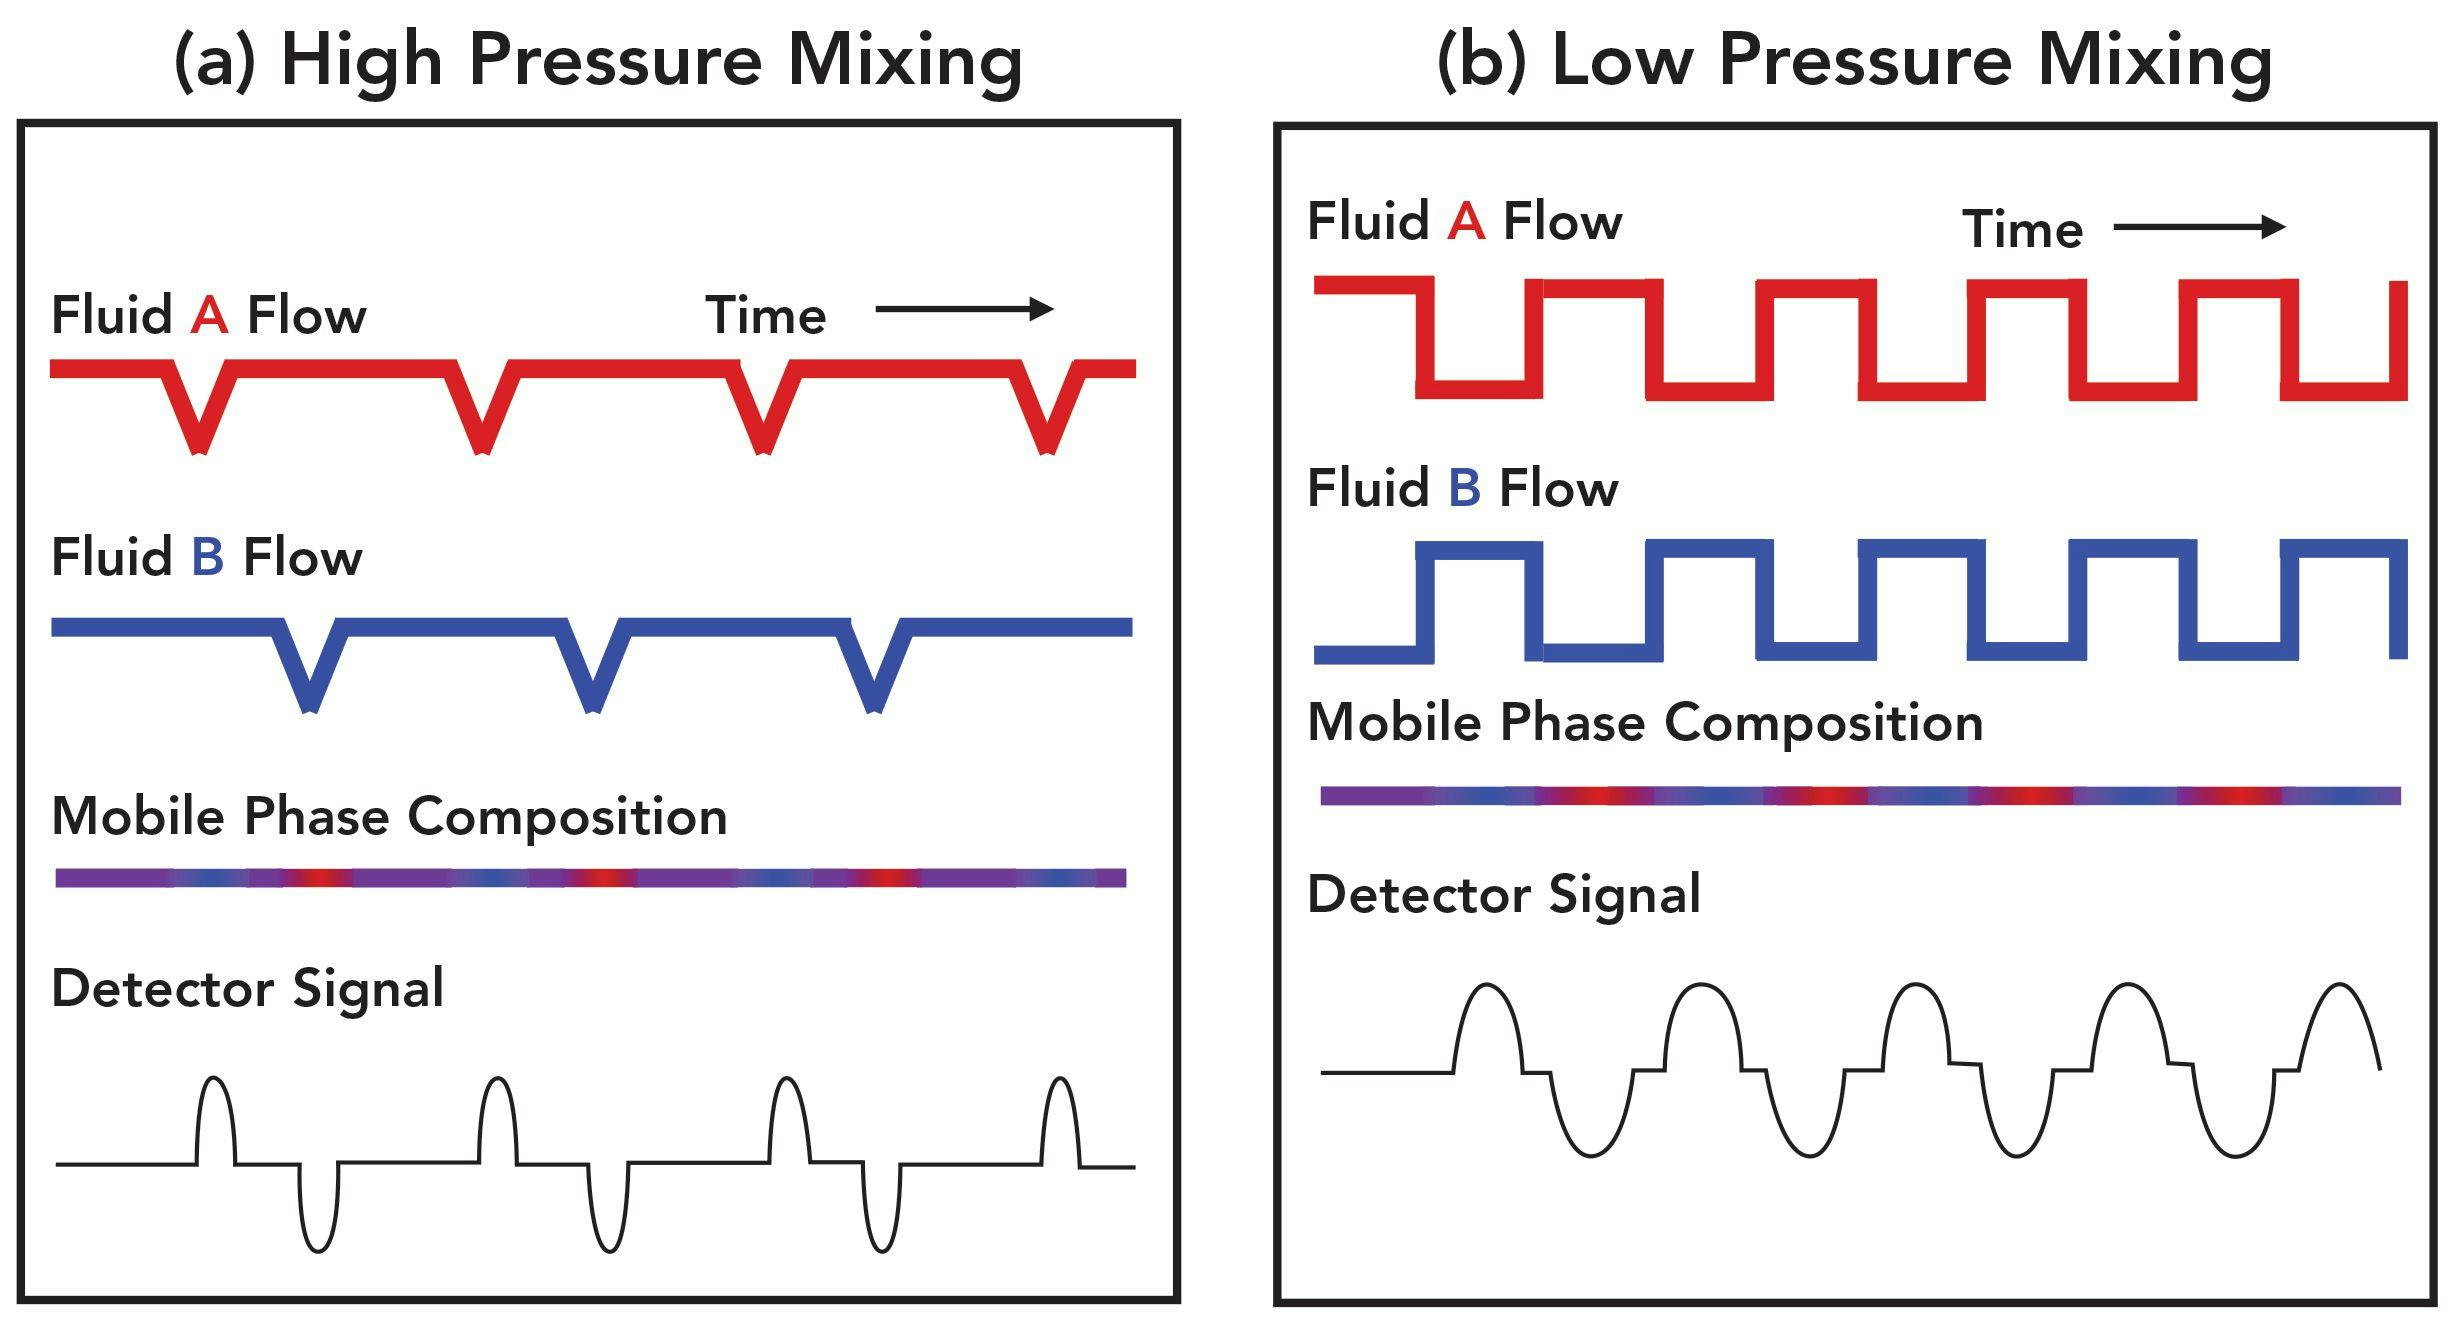 FIGURE 2: Conceptual illustration of the origin of mobile phase composition waves in the case of (a) high-pressure mixing and (b) low-pressure mixing designs used in modern pumps.